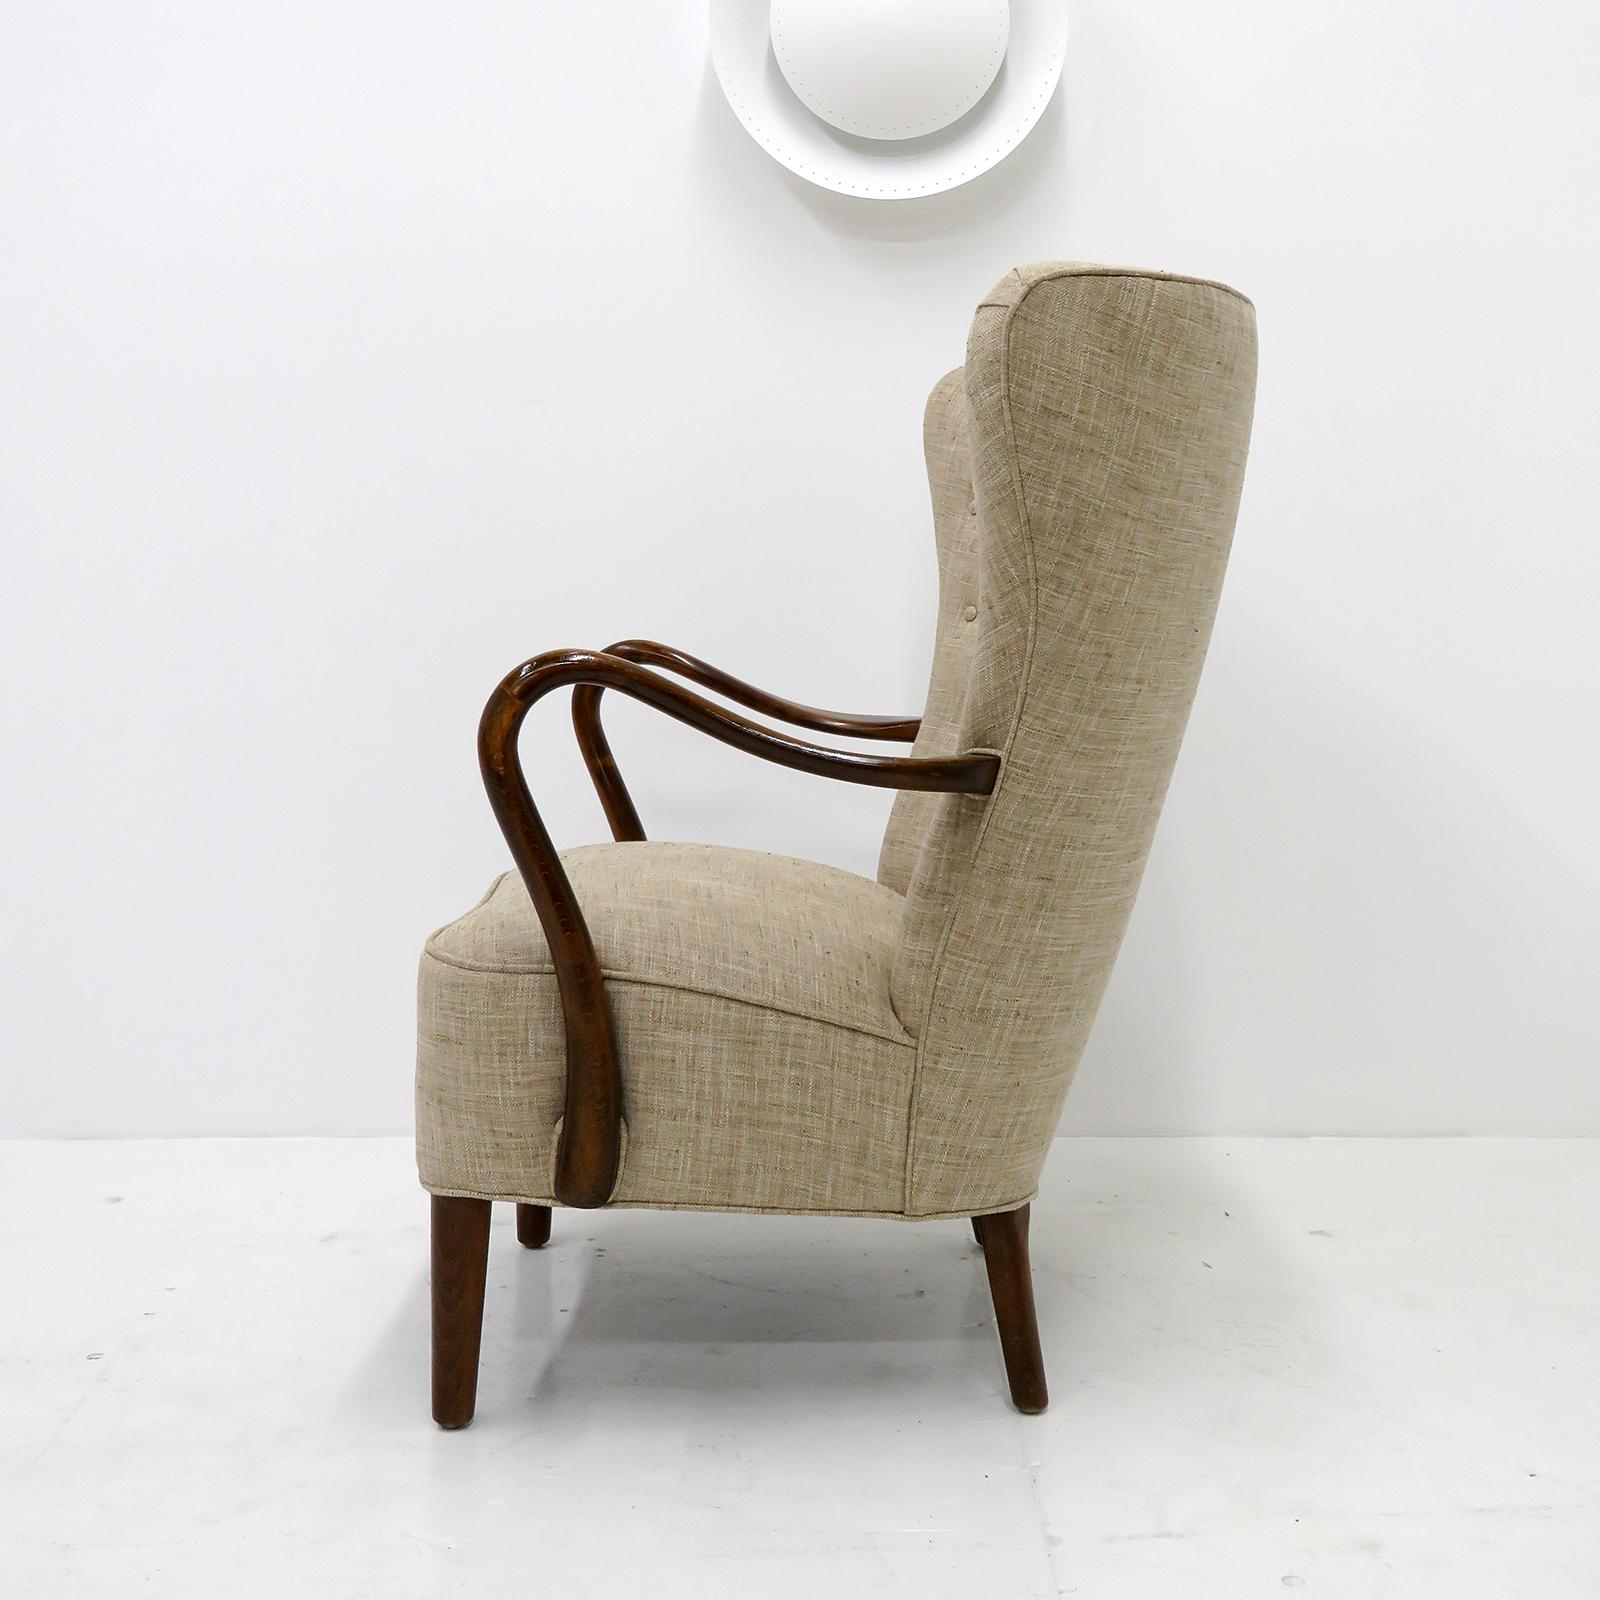 Stained Alfred Christensen Highback Lounge Chair, 1950 For Sale